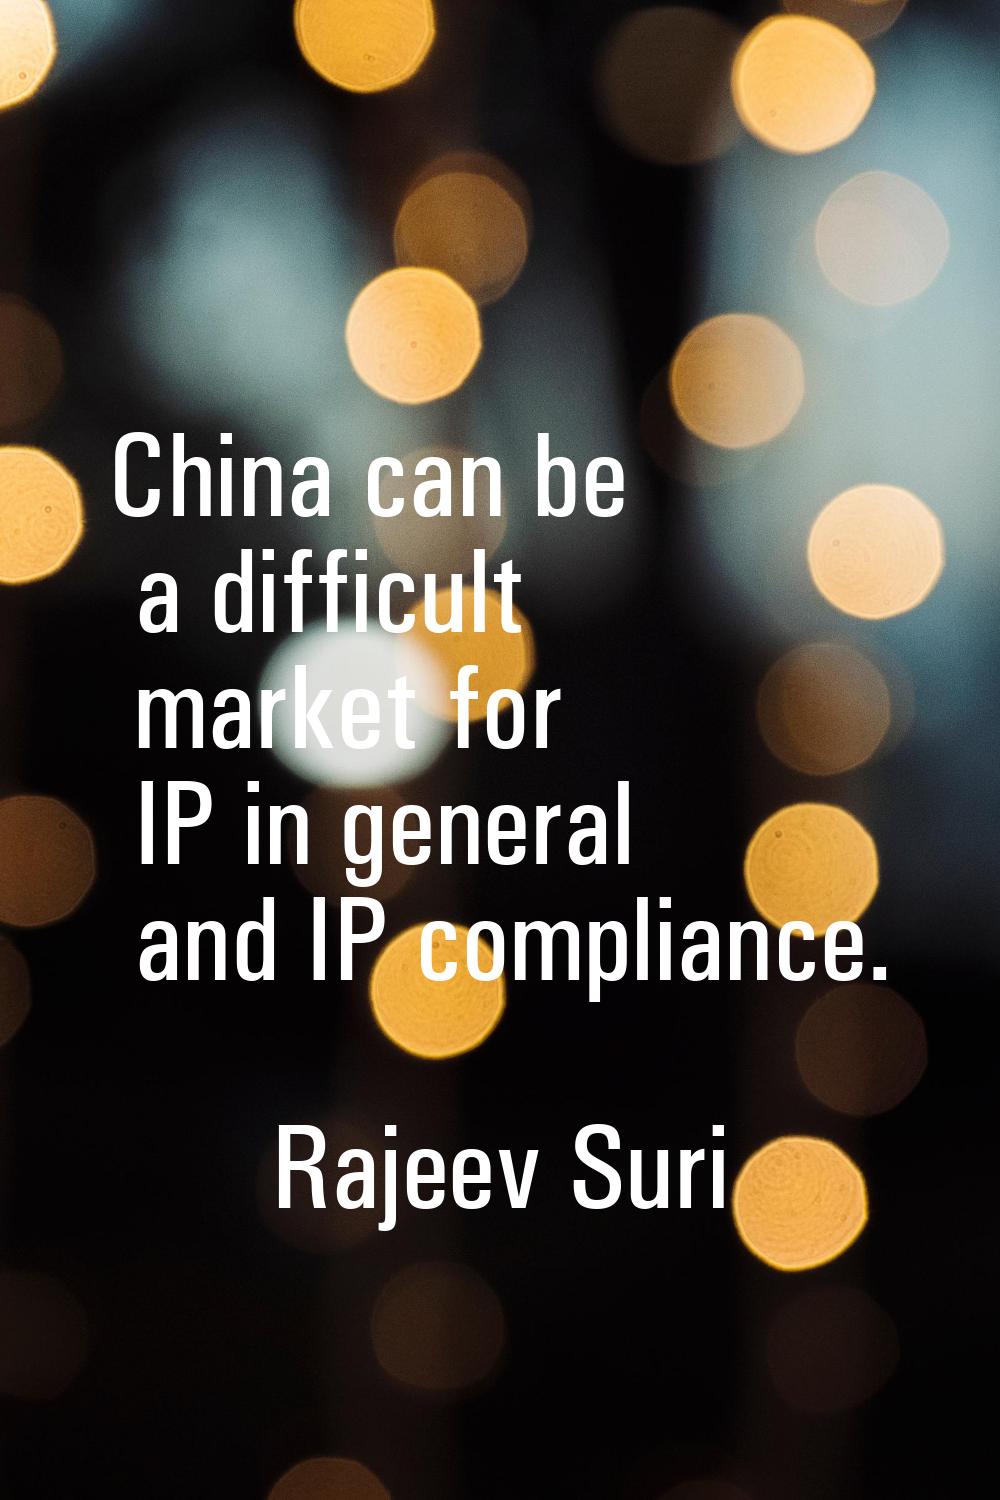 China can be a difficult market for IP in general and IP compliance.